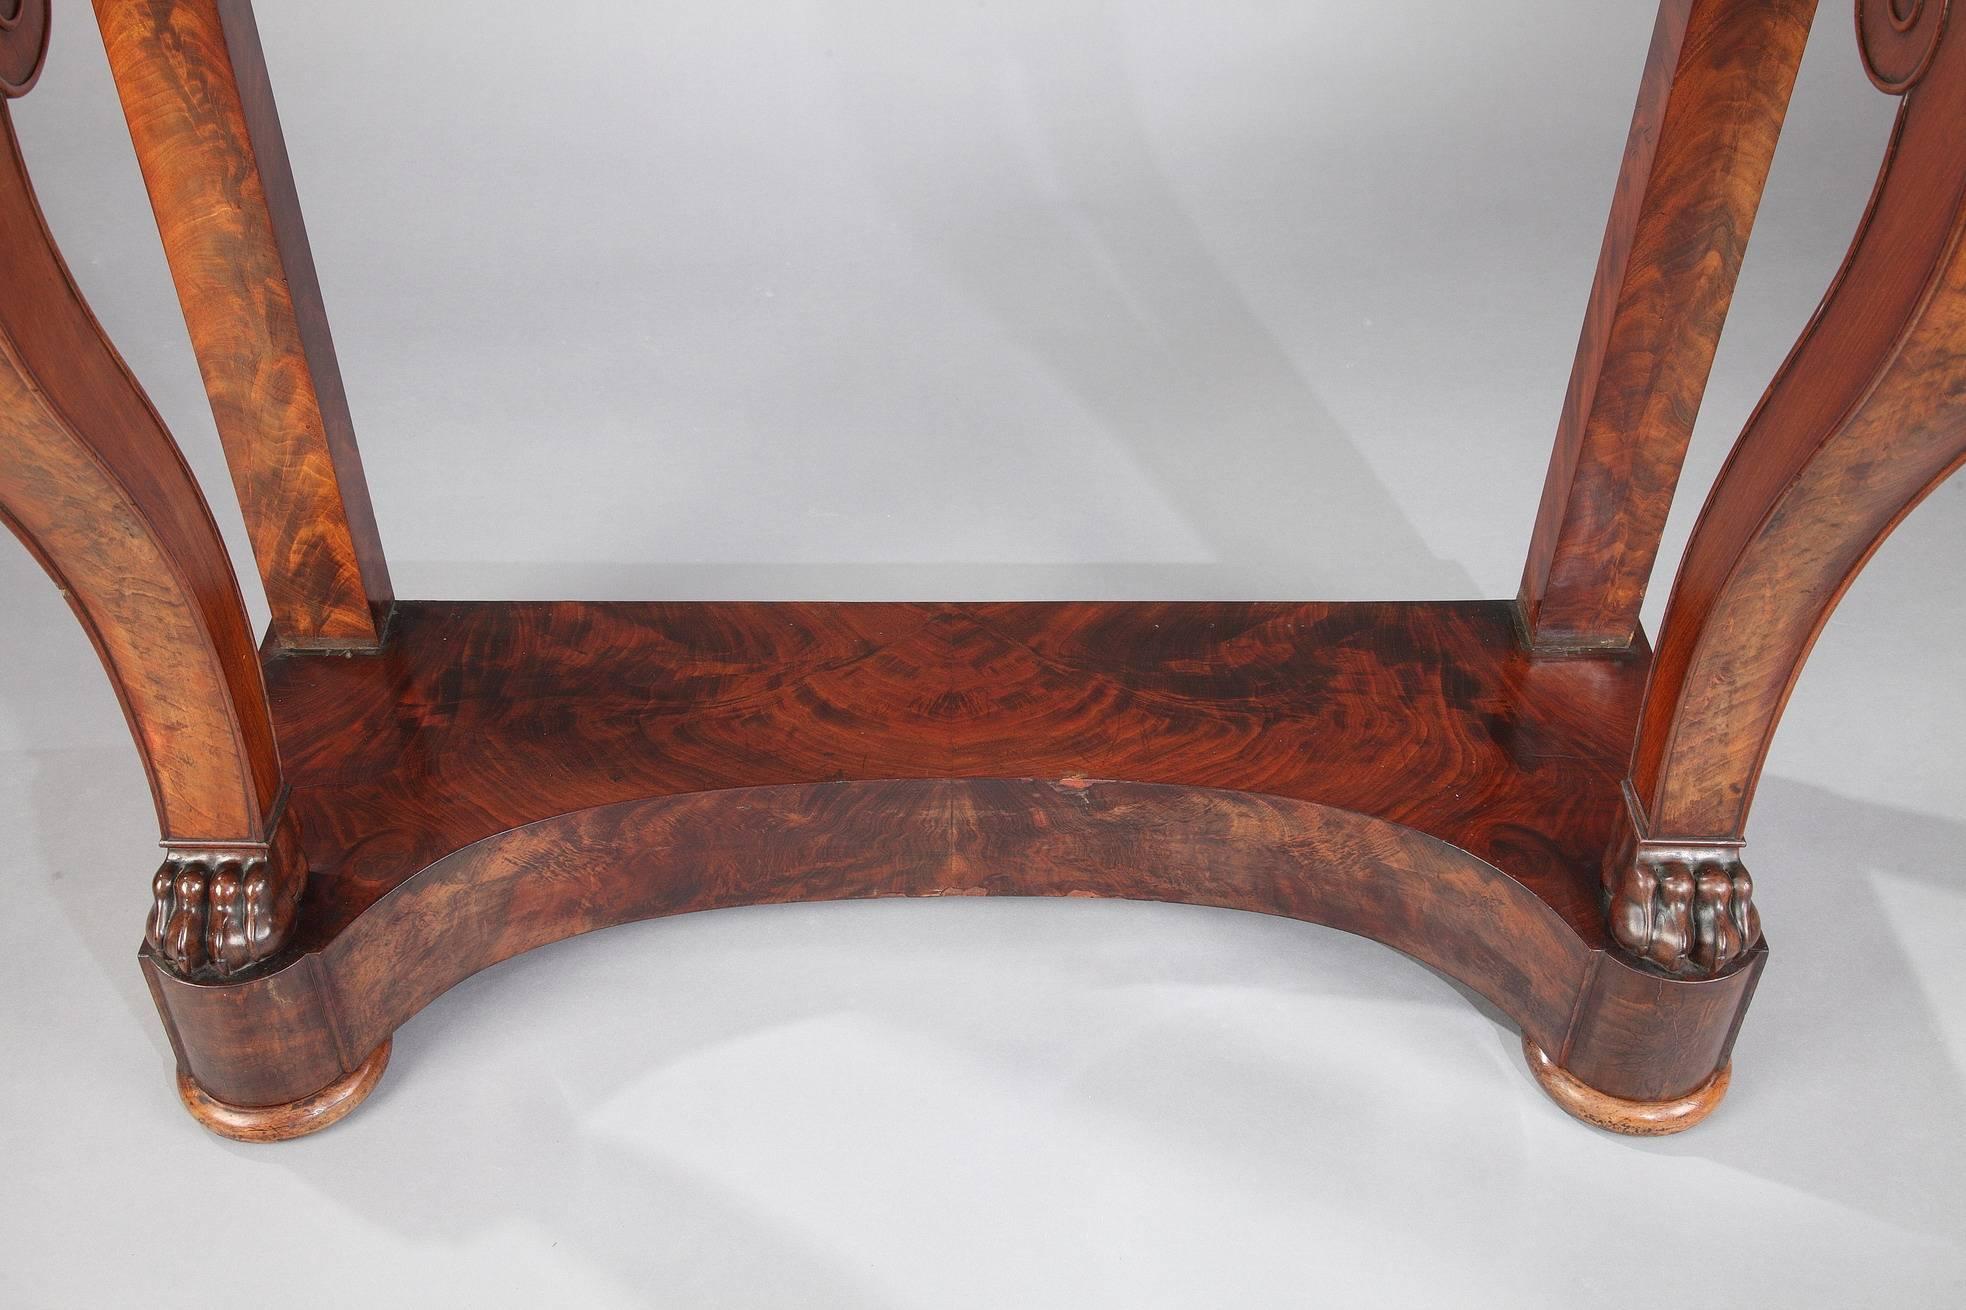 Empire Mahogany Console Table Stamped by Othon Kolping 1